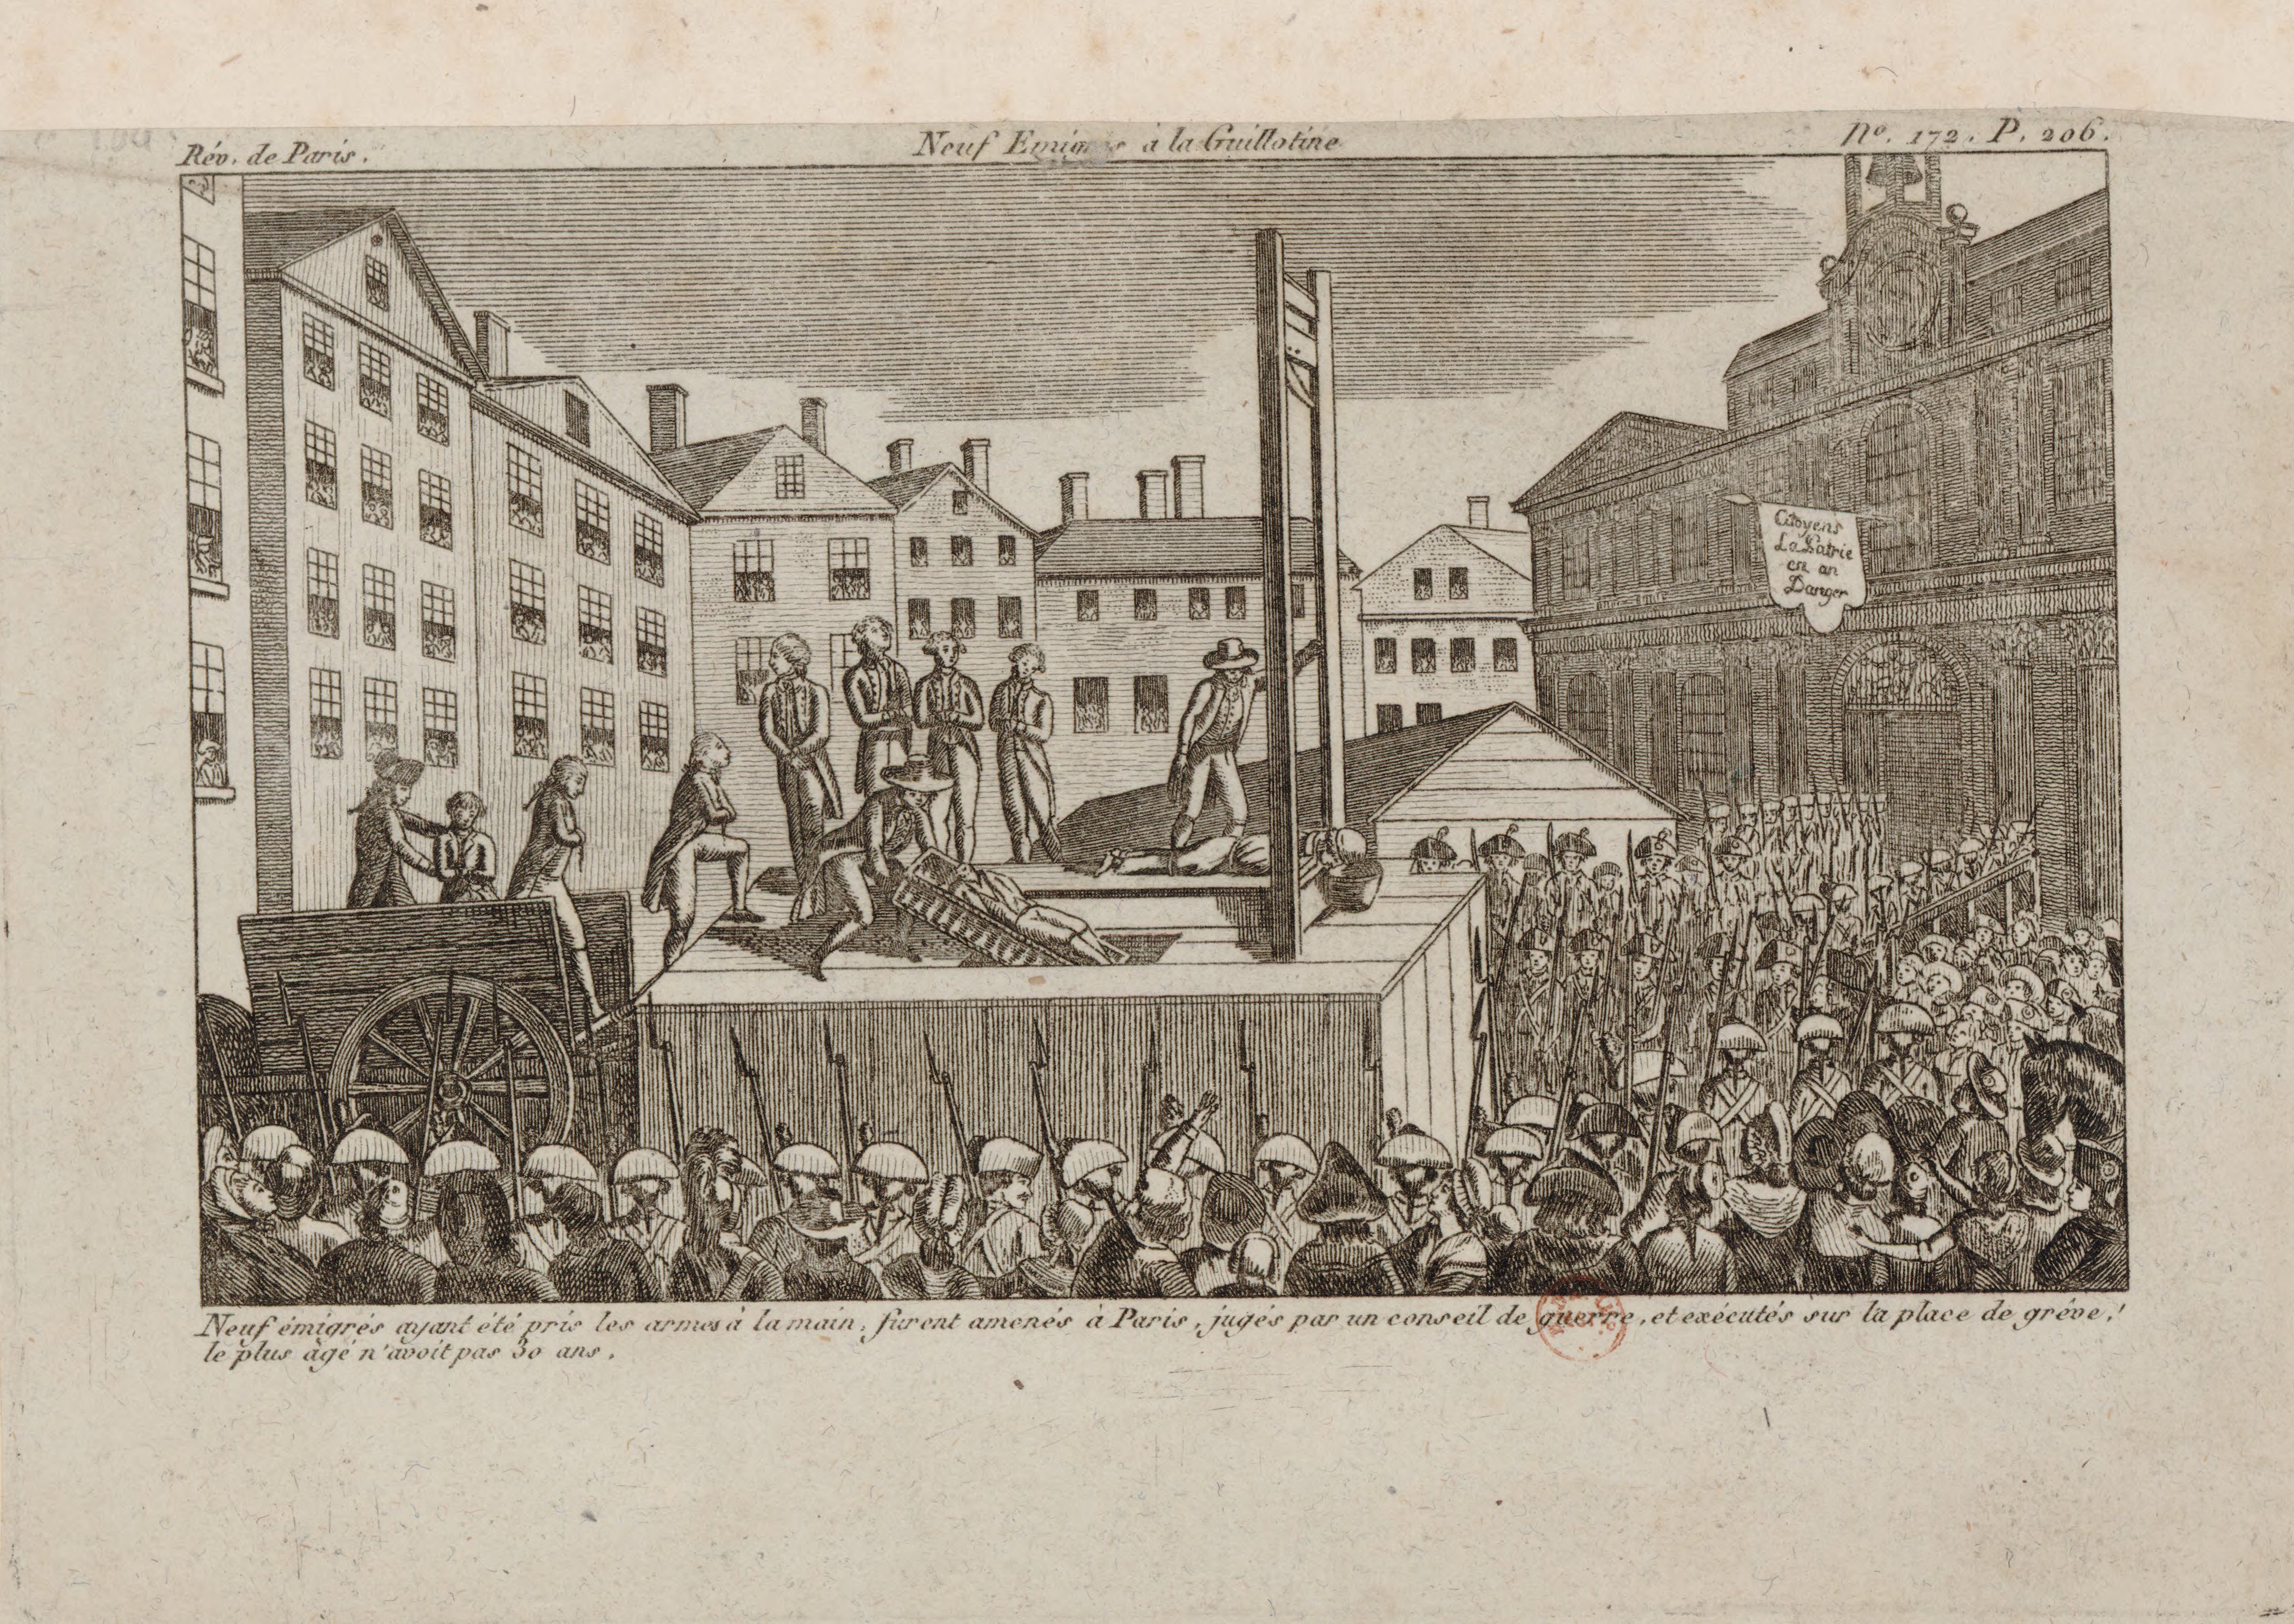 Engraving of nine "traitors" executed by guillotine